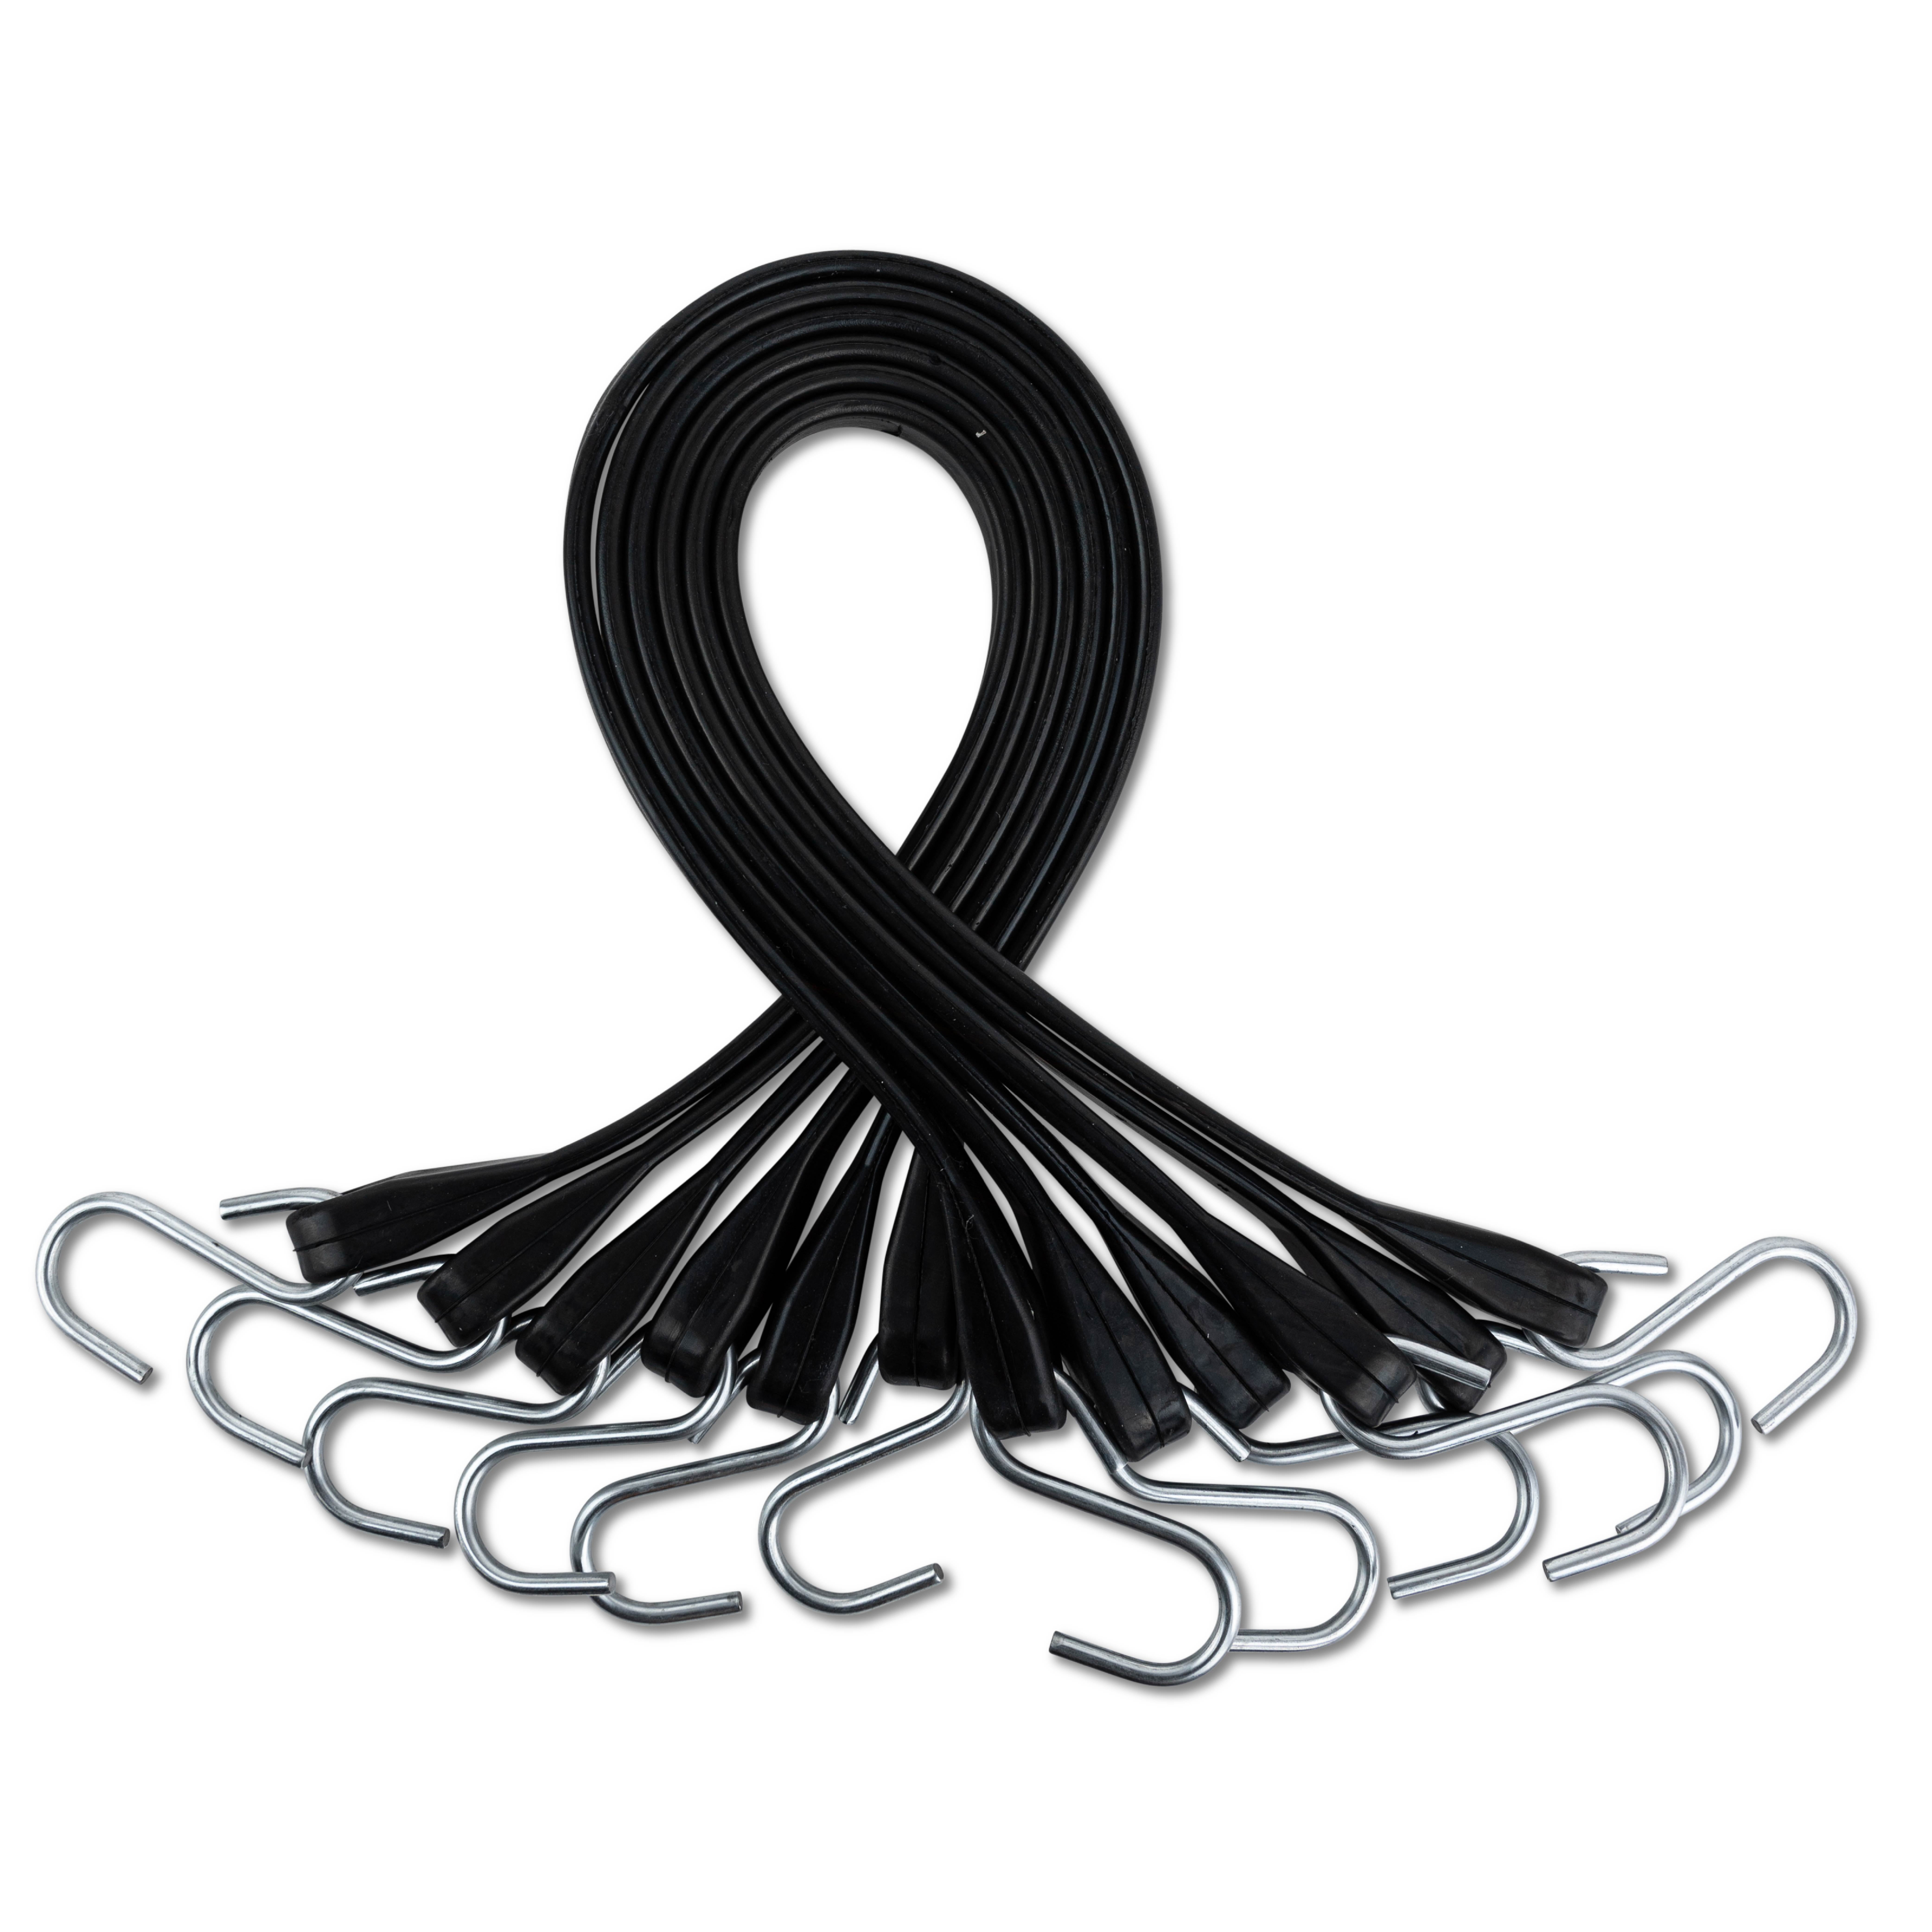 41 Inch Rubber Bungee Cords with Hooks - All Natural Rubber Heavy